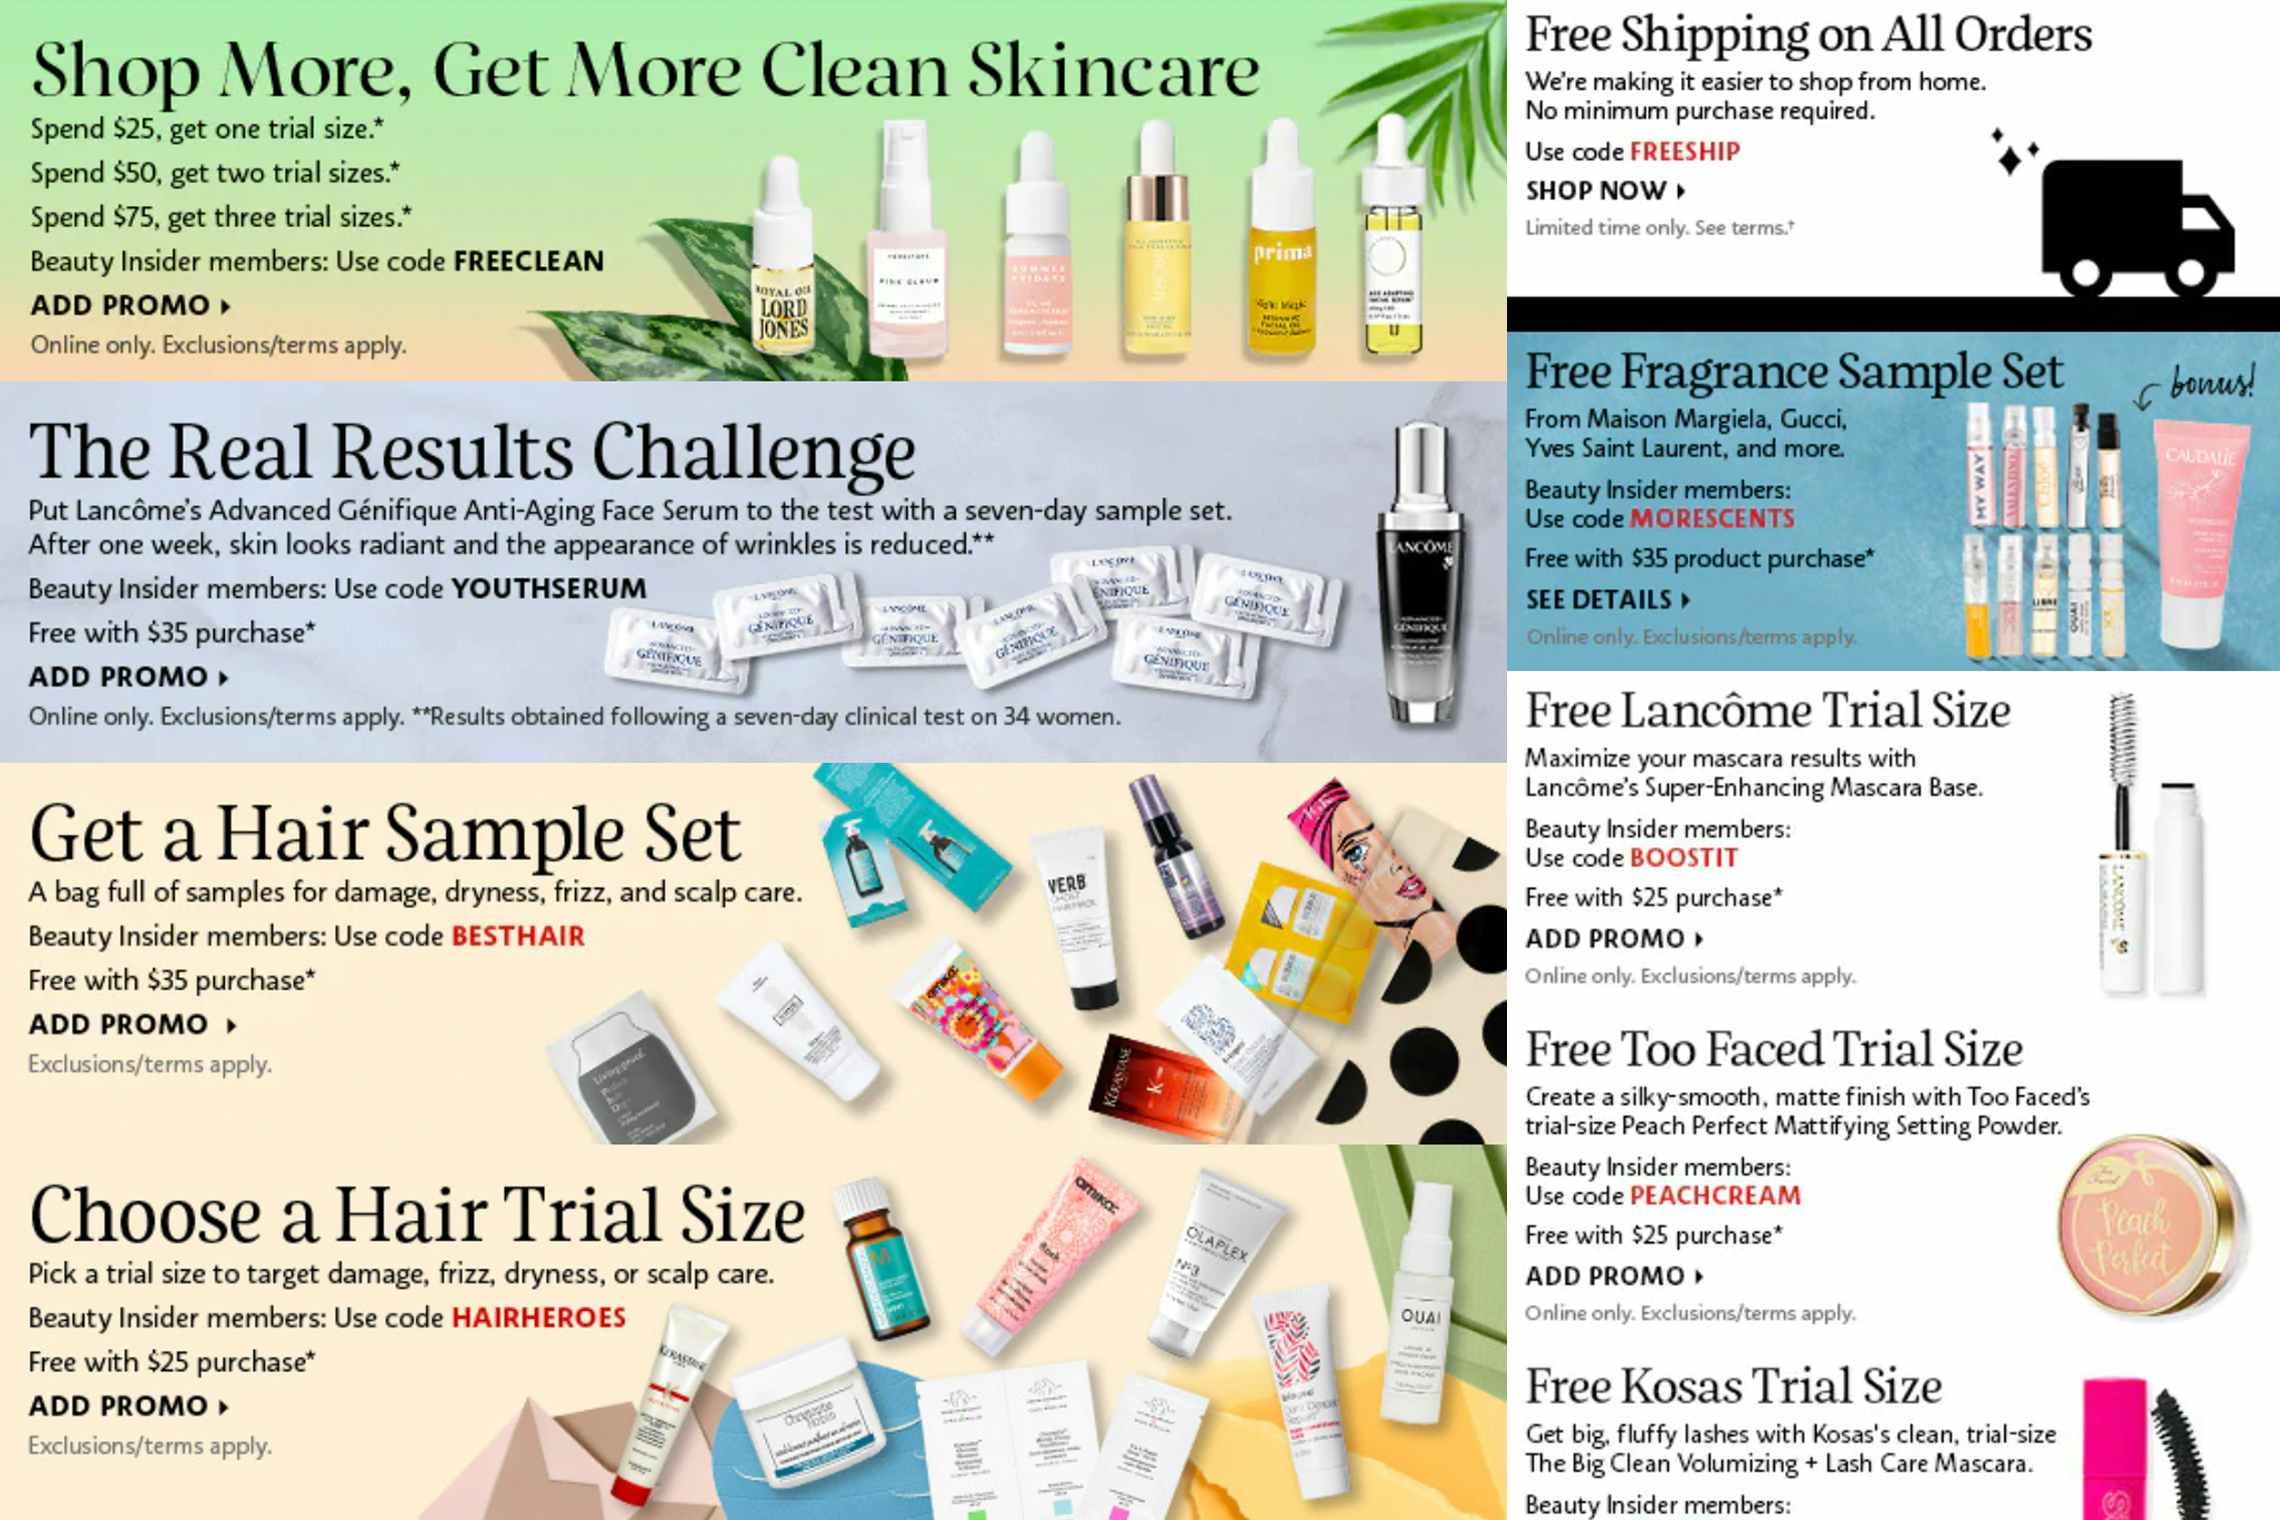 https://prod-cdn-thekrazycouponlady.imgix.net/wp-content/uploads/2015/07/sephora-beauty-offers-promo-codes-1602007674-1602007674.jpg?auto=format&fit=fill&q=25